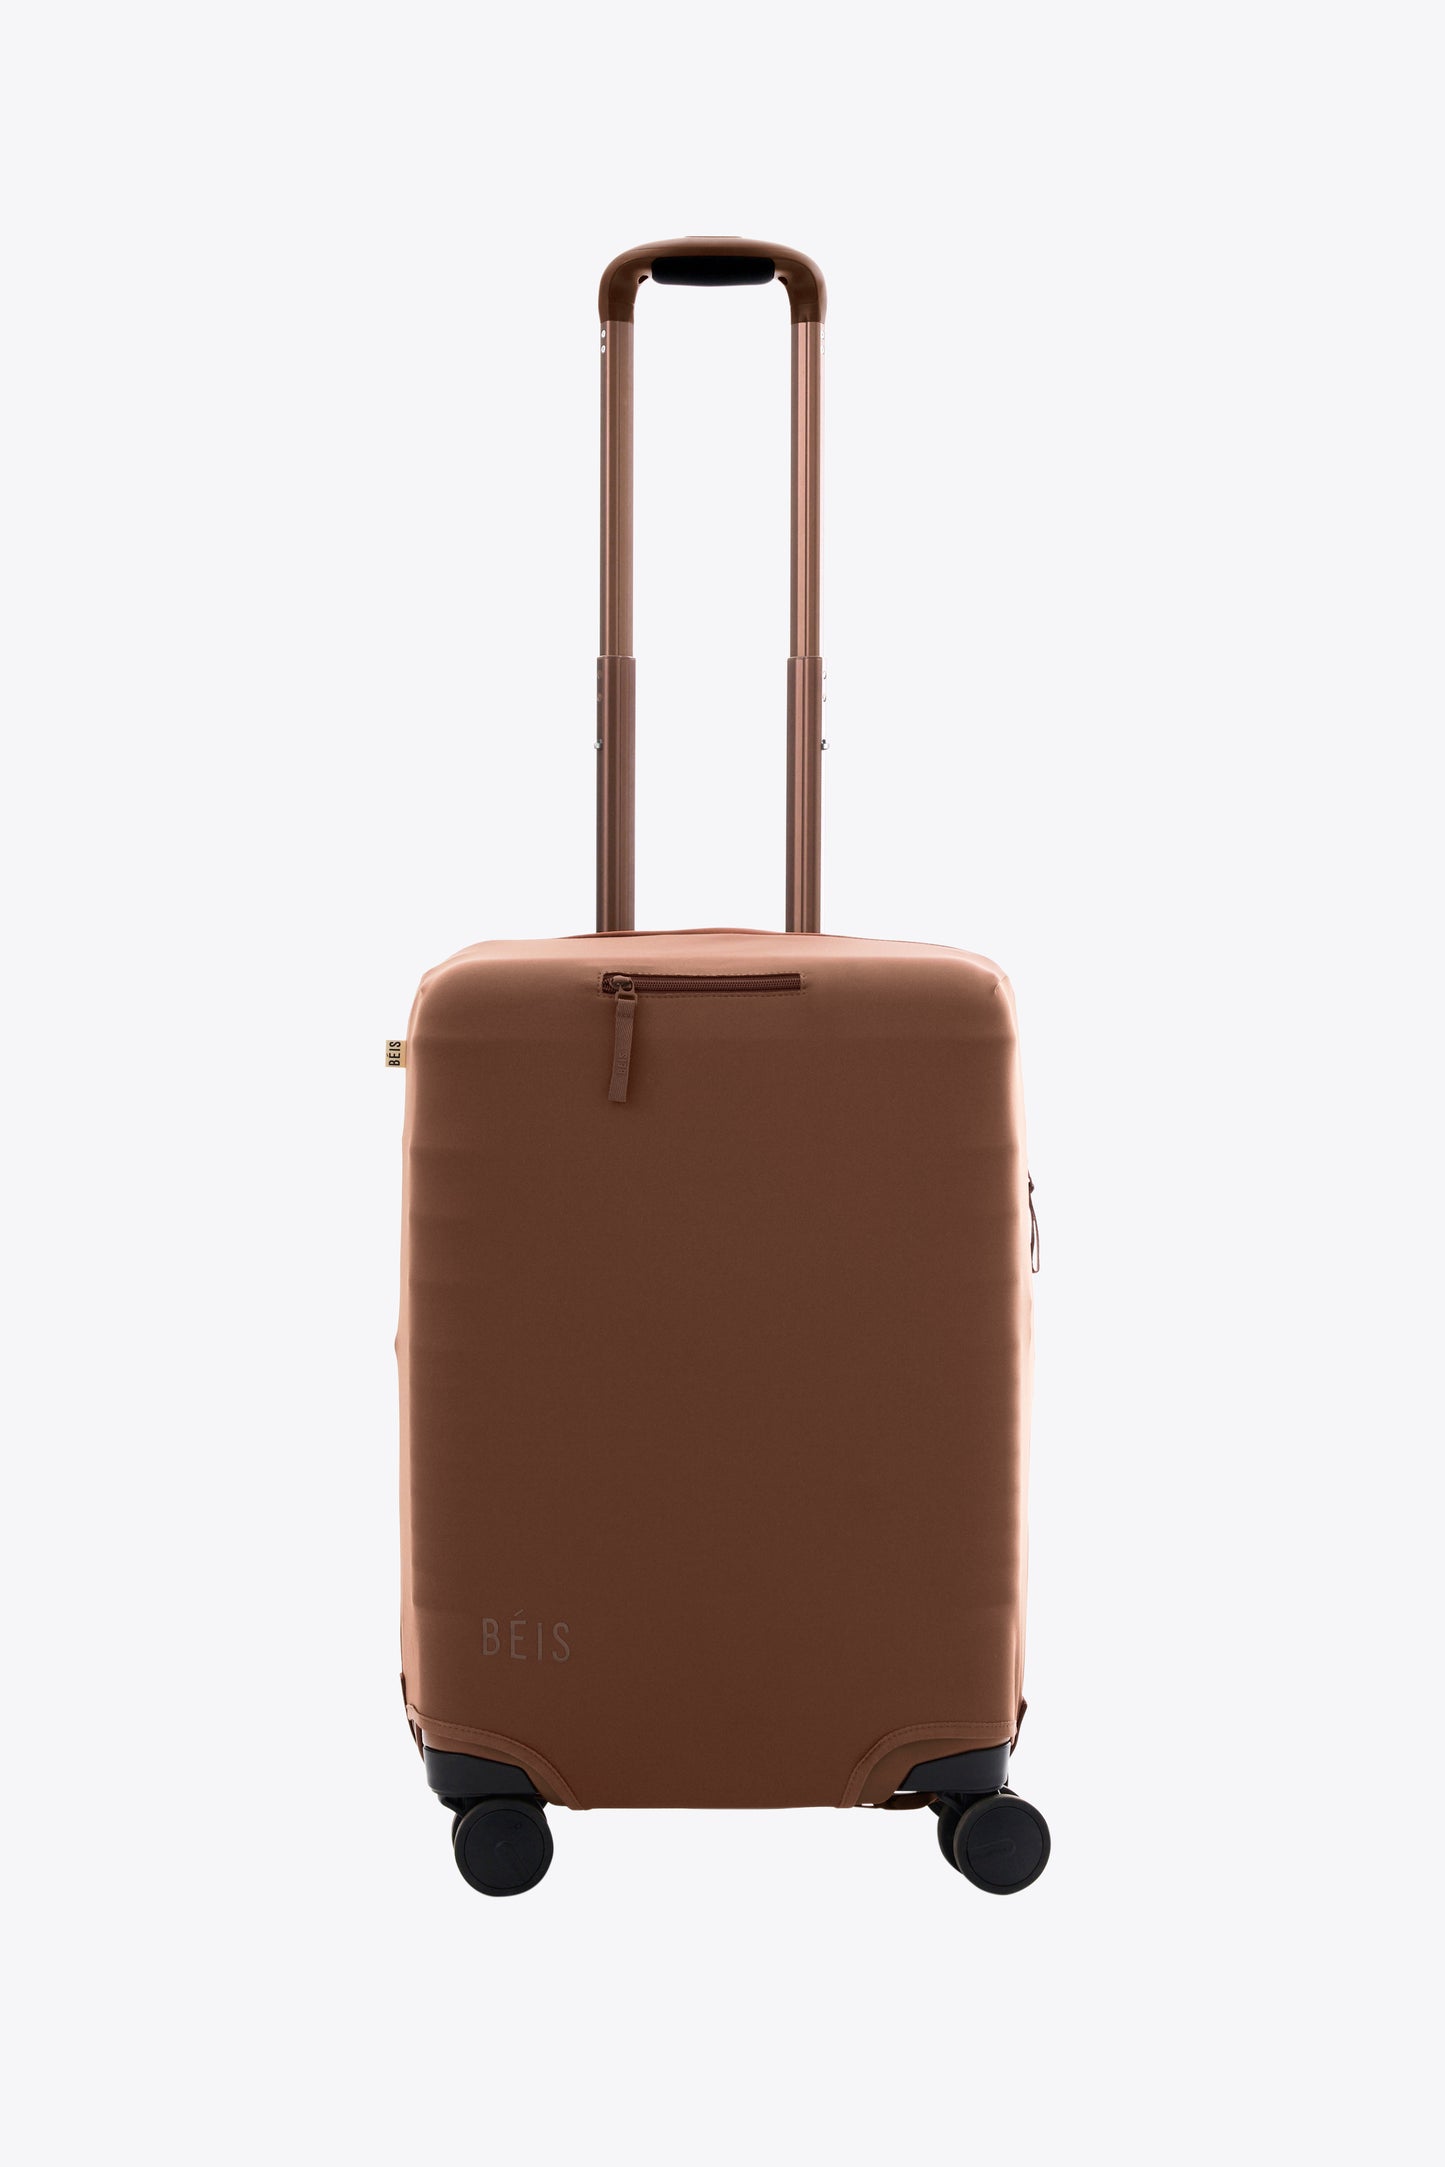 The Carry-On Luggage Cover in Maple